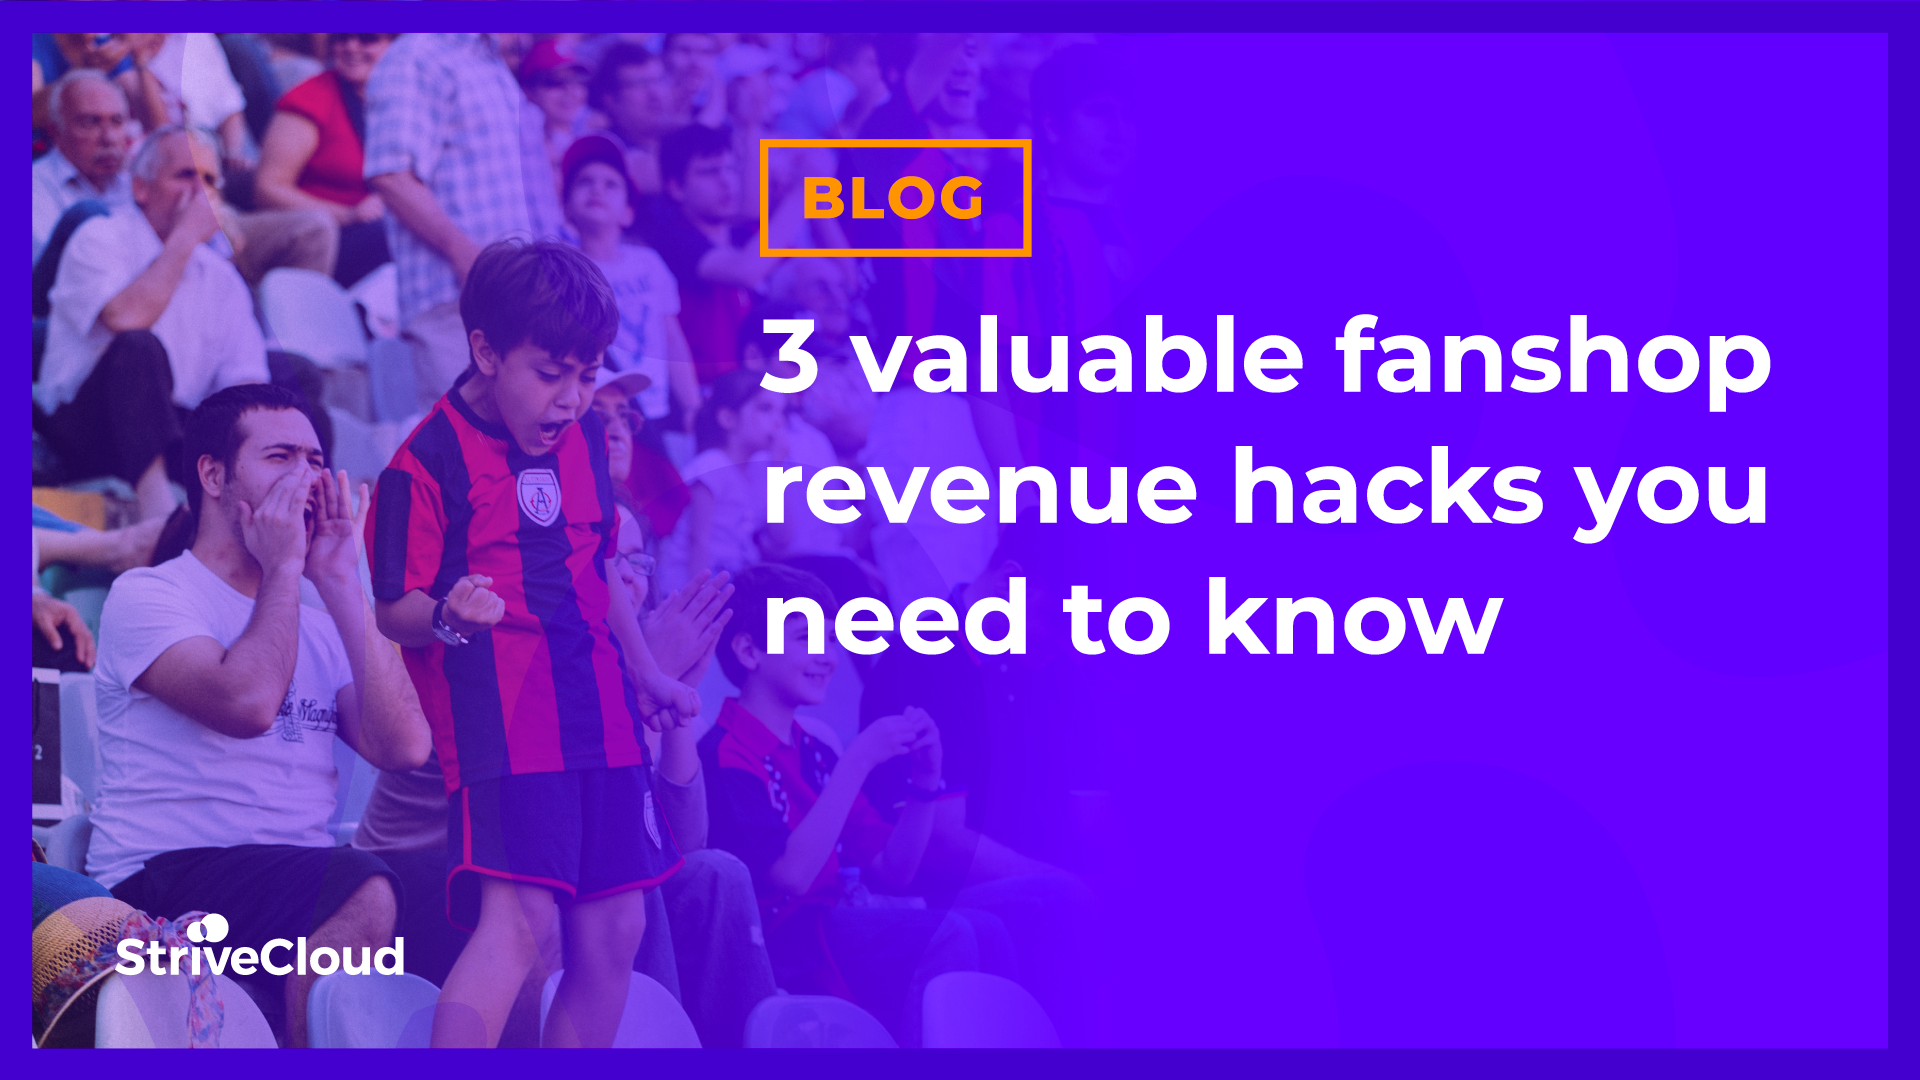 3 valuable fanshop revenue hacks you need to know